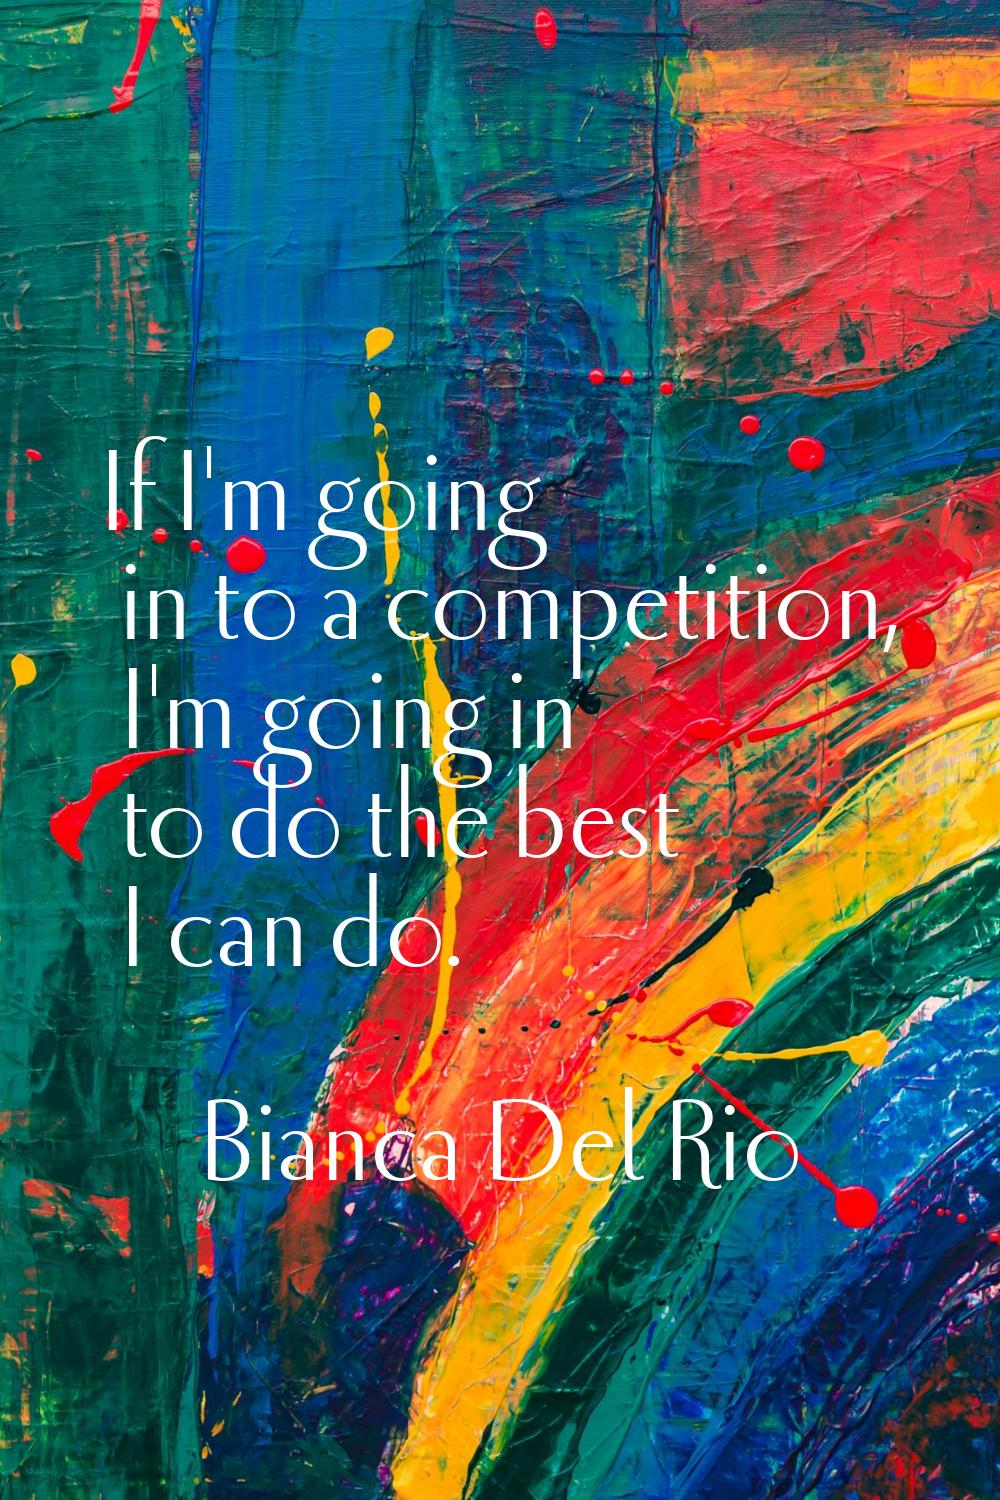 If I'm going in to a competition, I'm going in to do the best I can do.